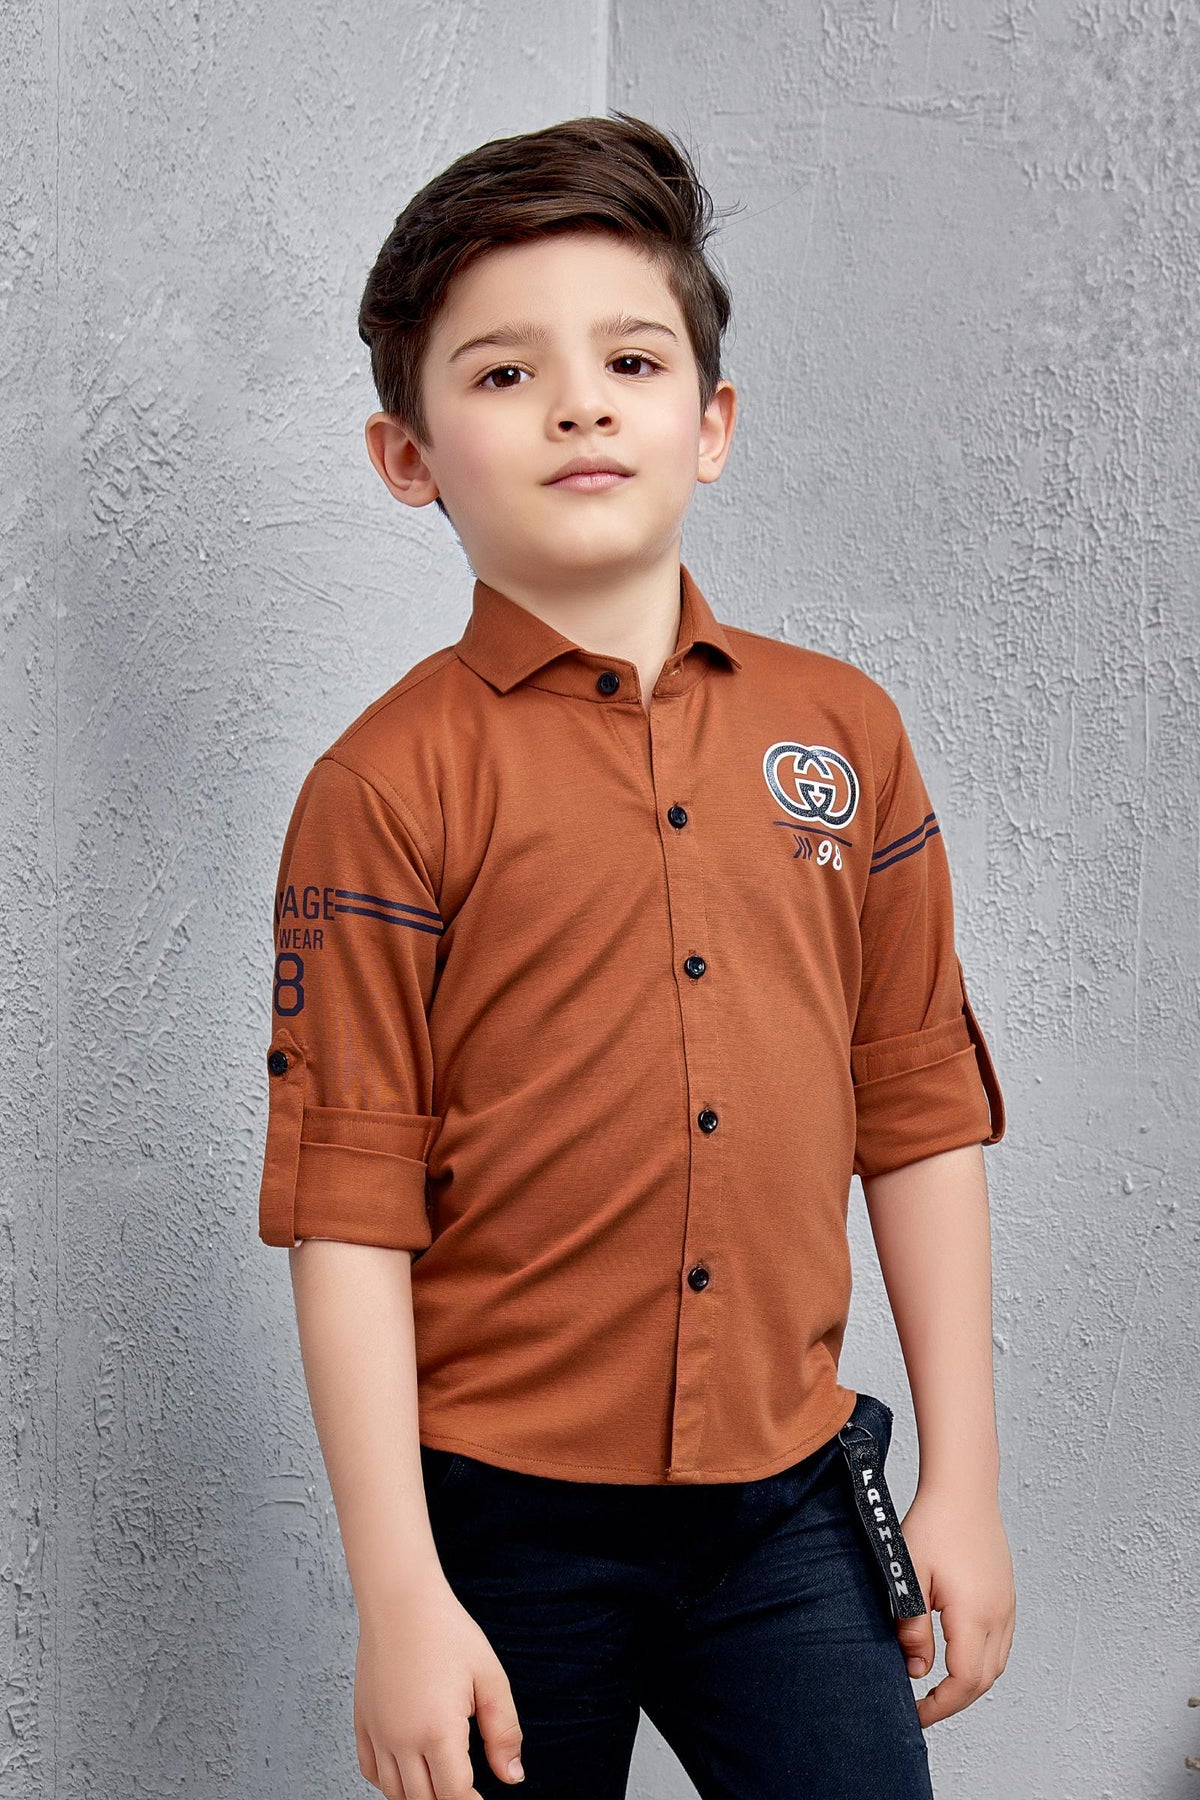 Buy Boys Clothes Online in India | Boys Latest Dresses